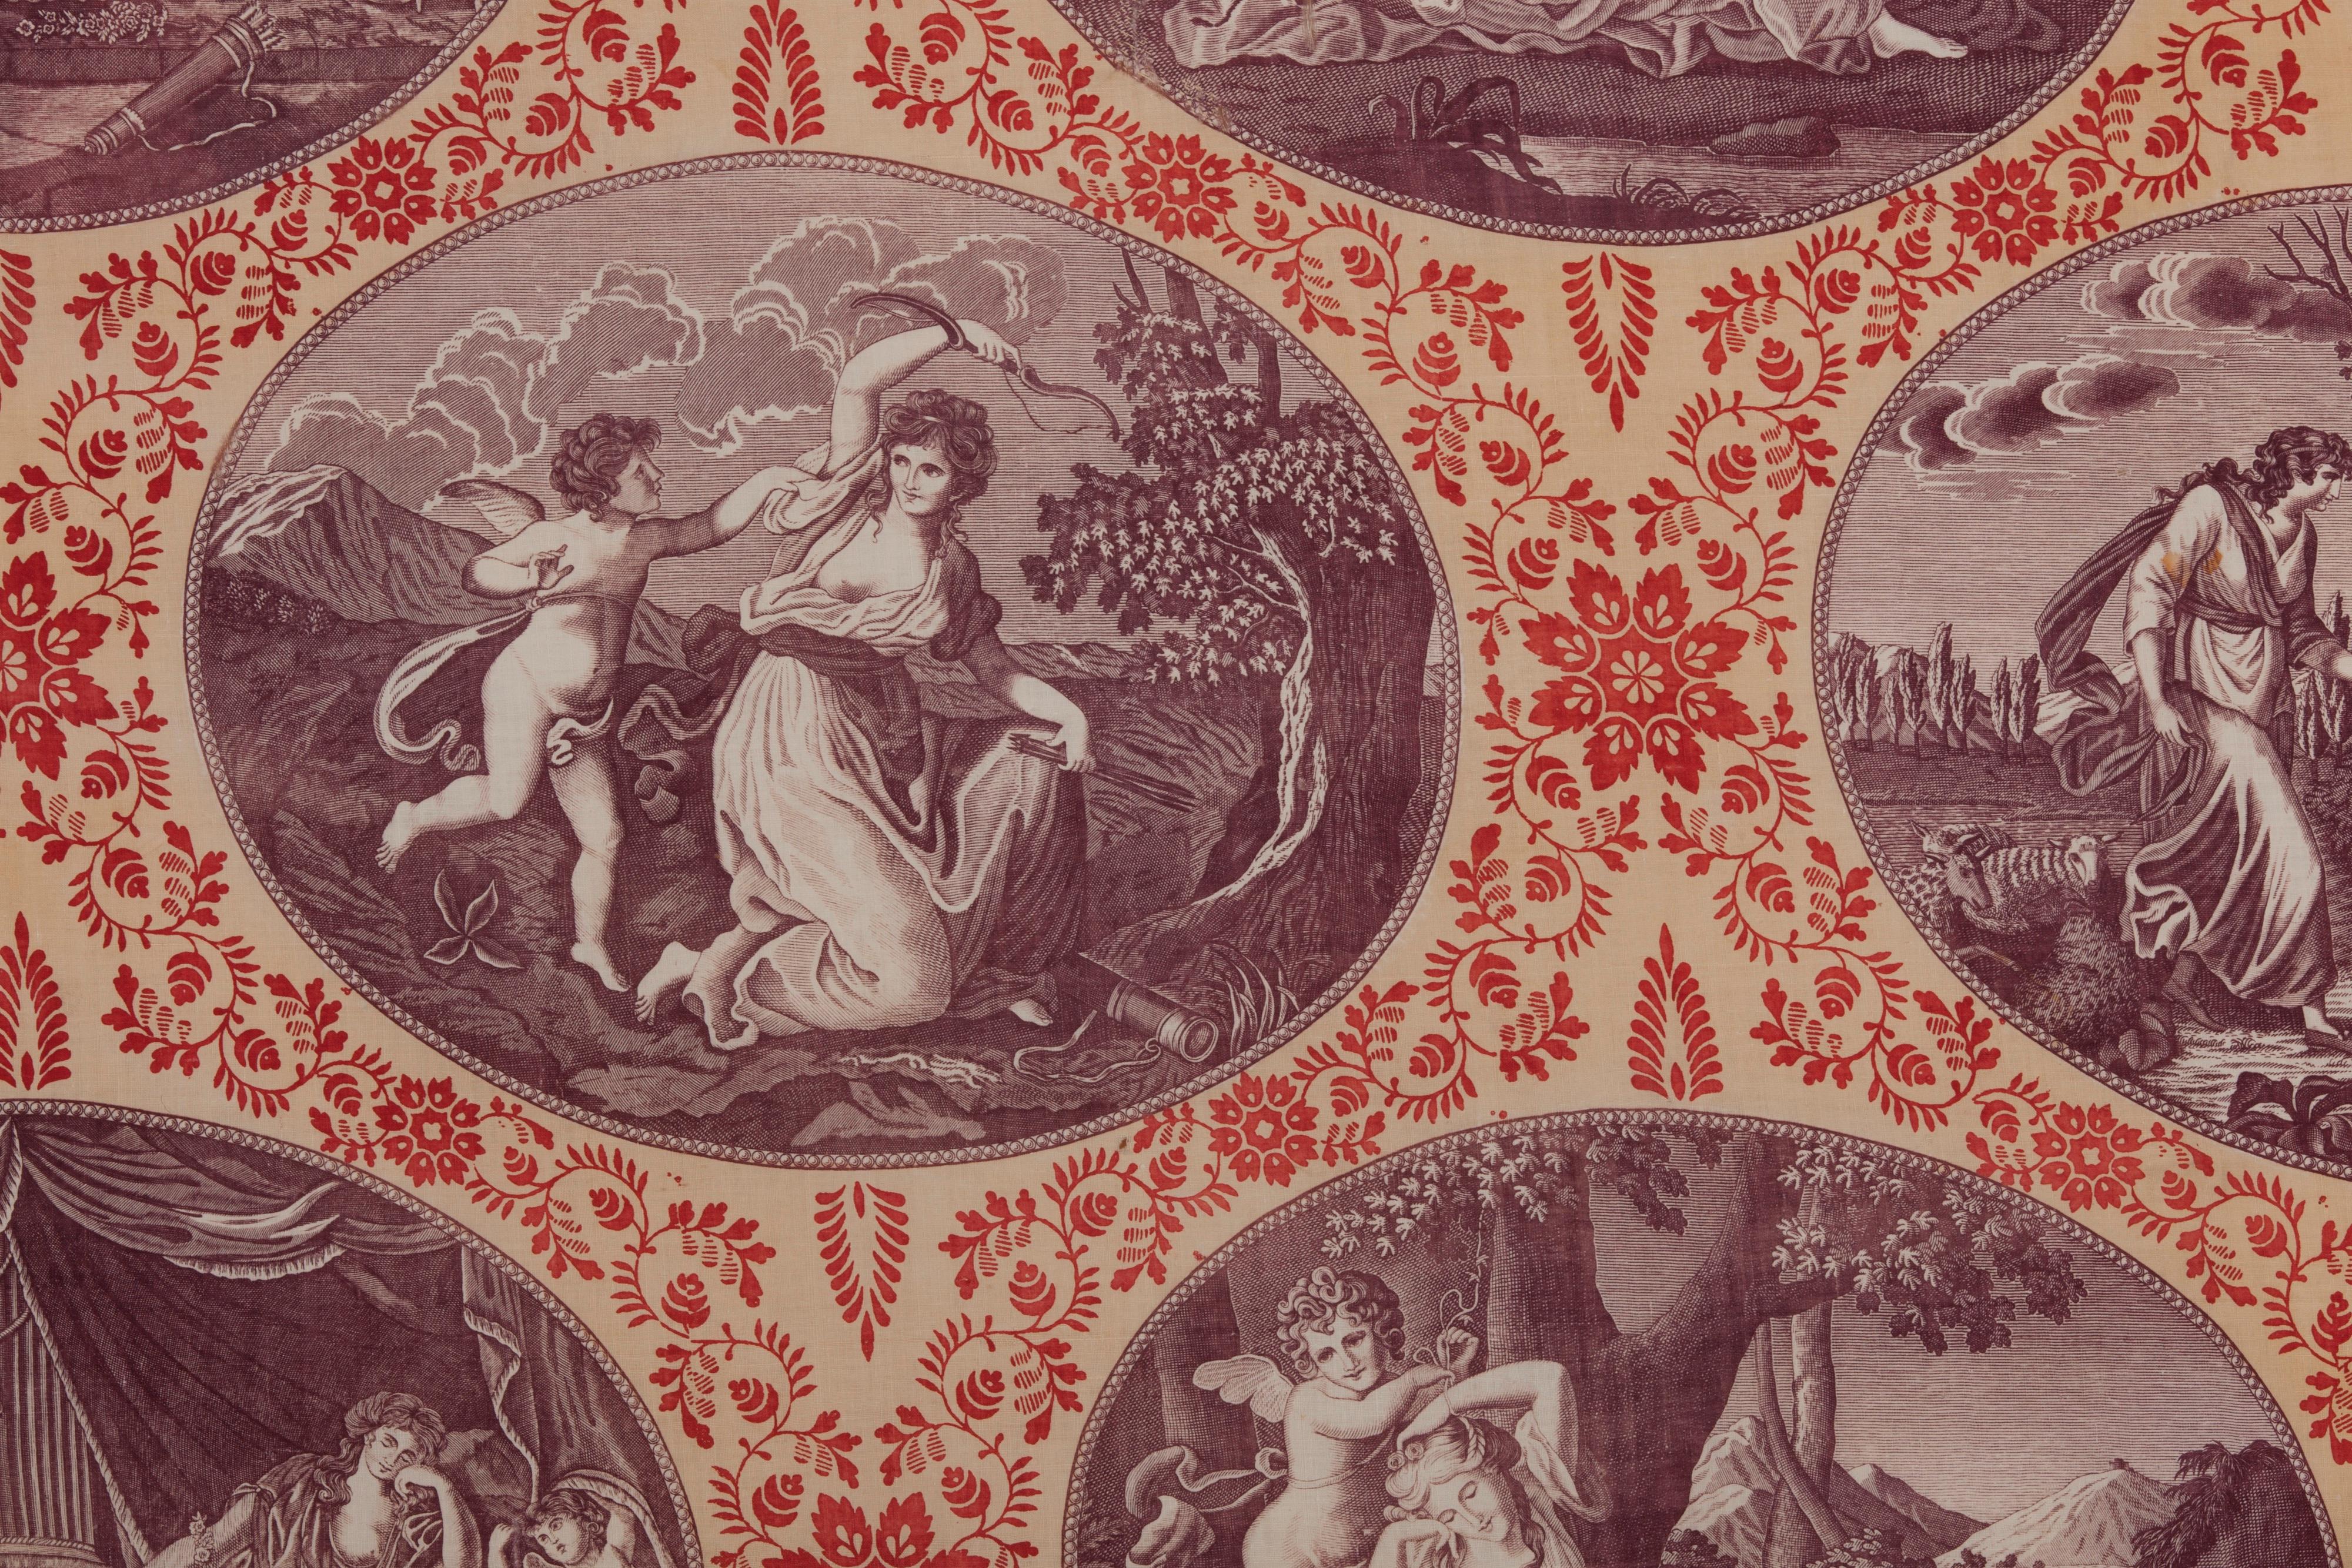 Printed toile fragment constructed in three parts; 4 offset cartouches with antique scenes depicting Cupid and Psyche (sleeping figure); likely used as a valance; small holes and slight stains; manufactured by Favre Petitpierre & Cie circa 1815;